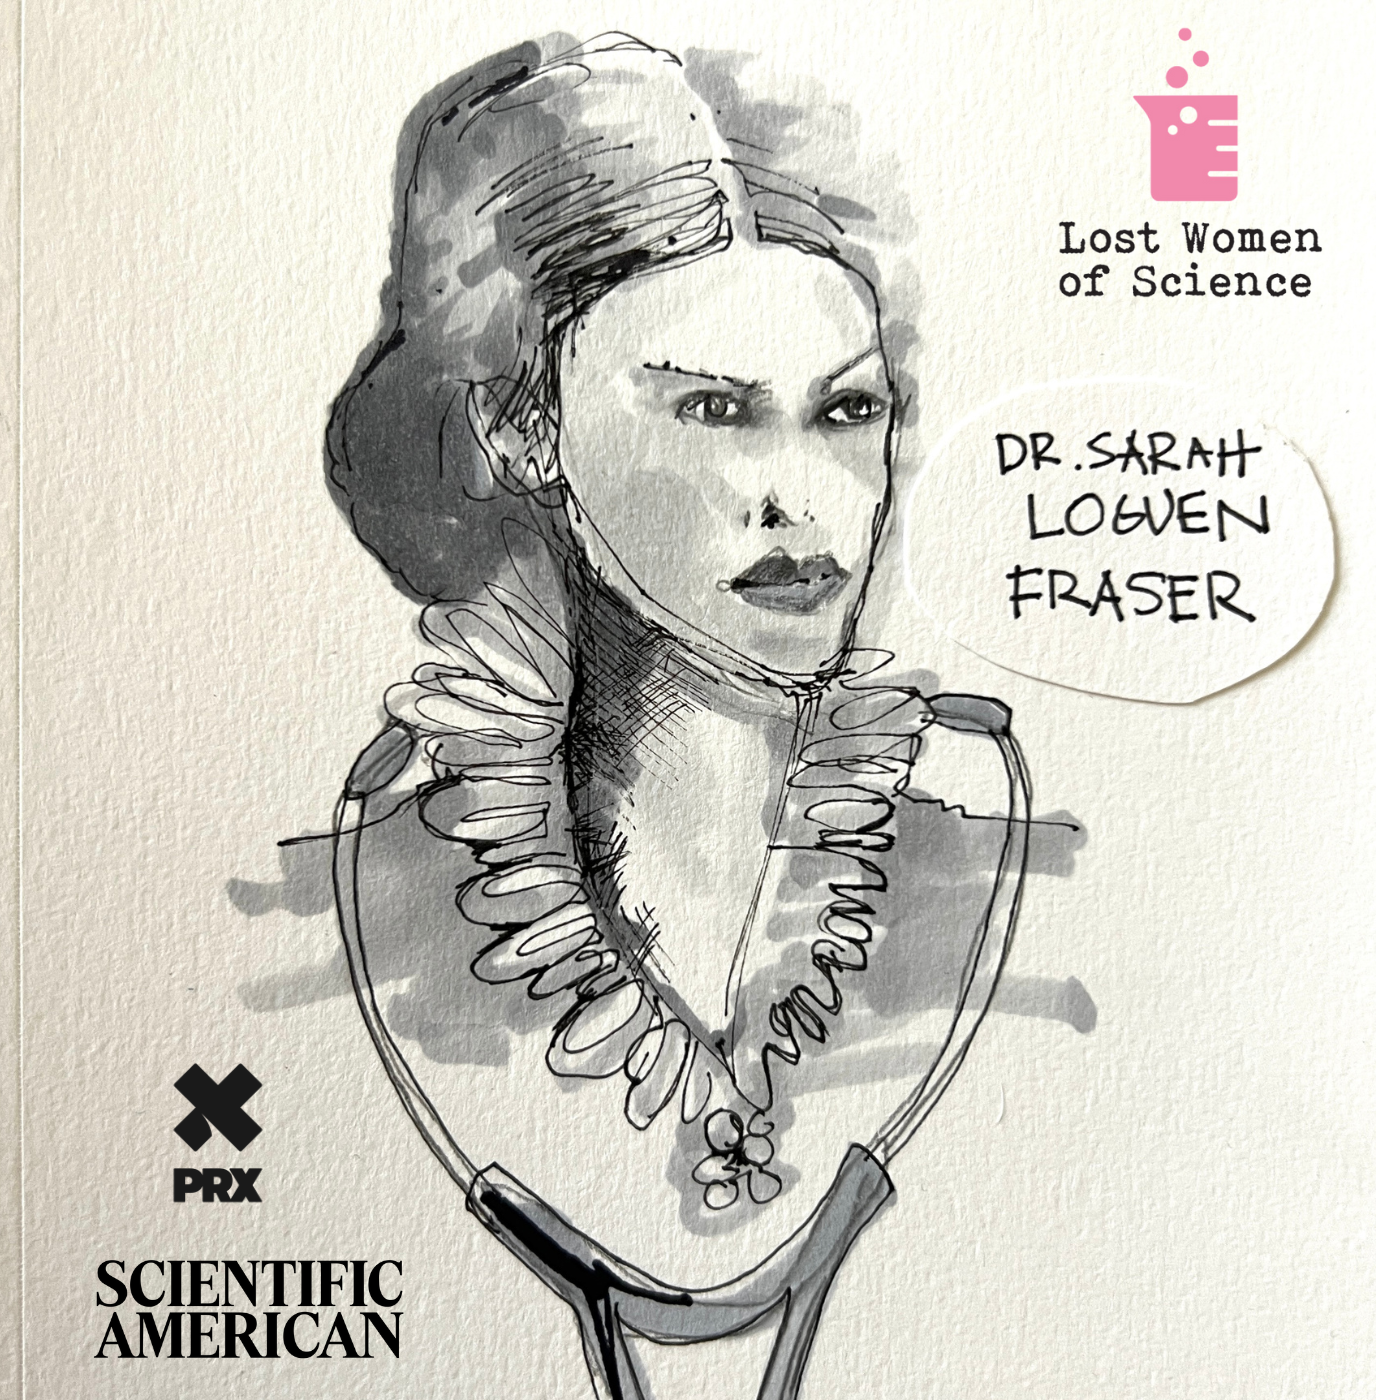 Thumbnail for "Dr. Sarah Loguen Fraser, an ex-slave’s daughter, becomes a celebrated doctor".